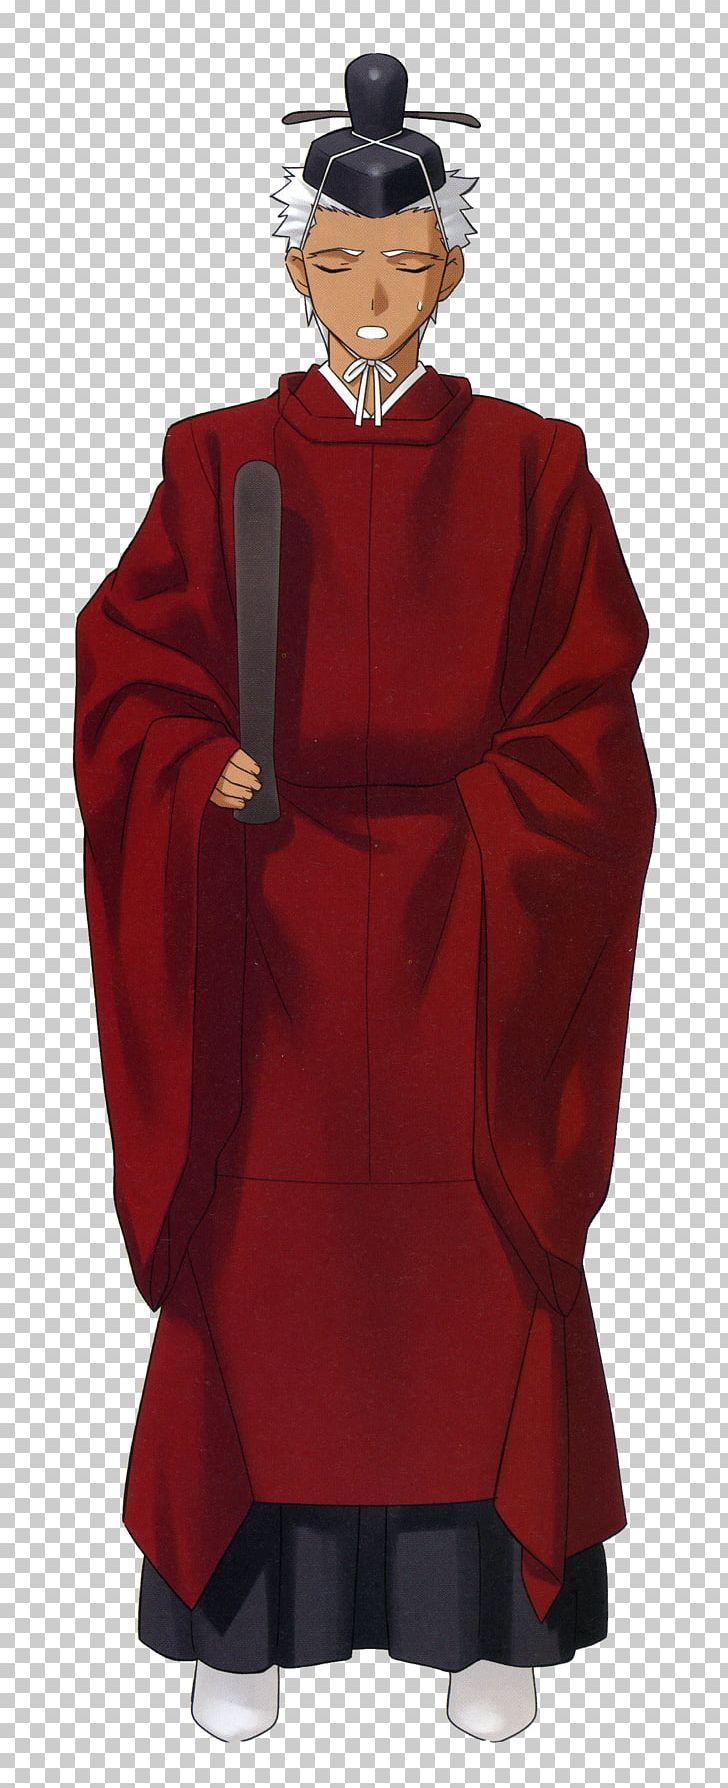 Fate/stay Night Fate/Extra Shirou Emiya Archer Shinto Shrine PNG, Clipart, Academic Dress, Anime, Archer, Cartoon, Clergy Free PNG Download